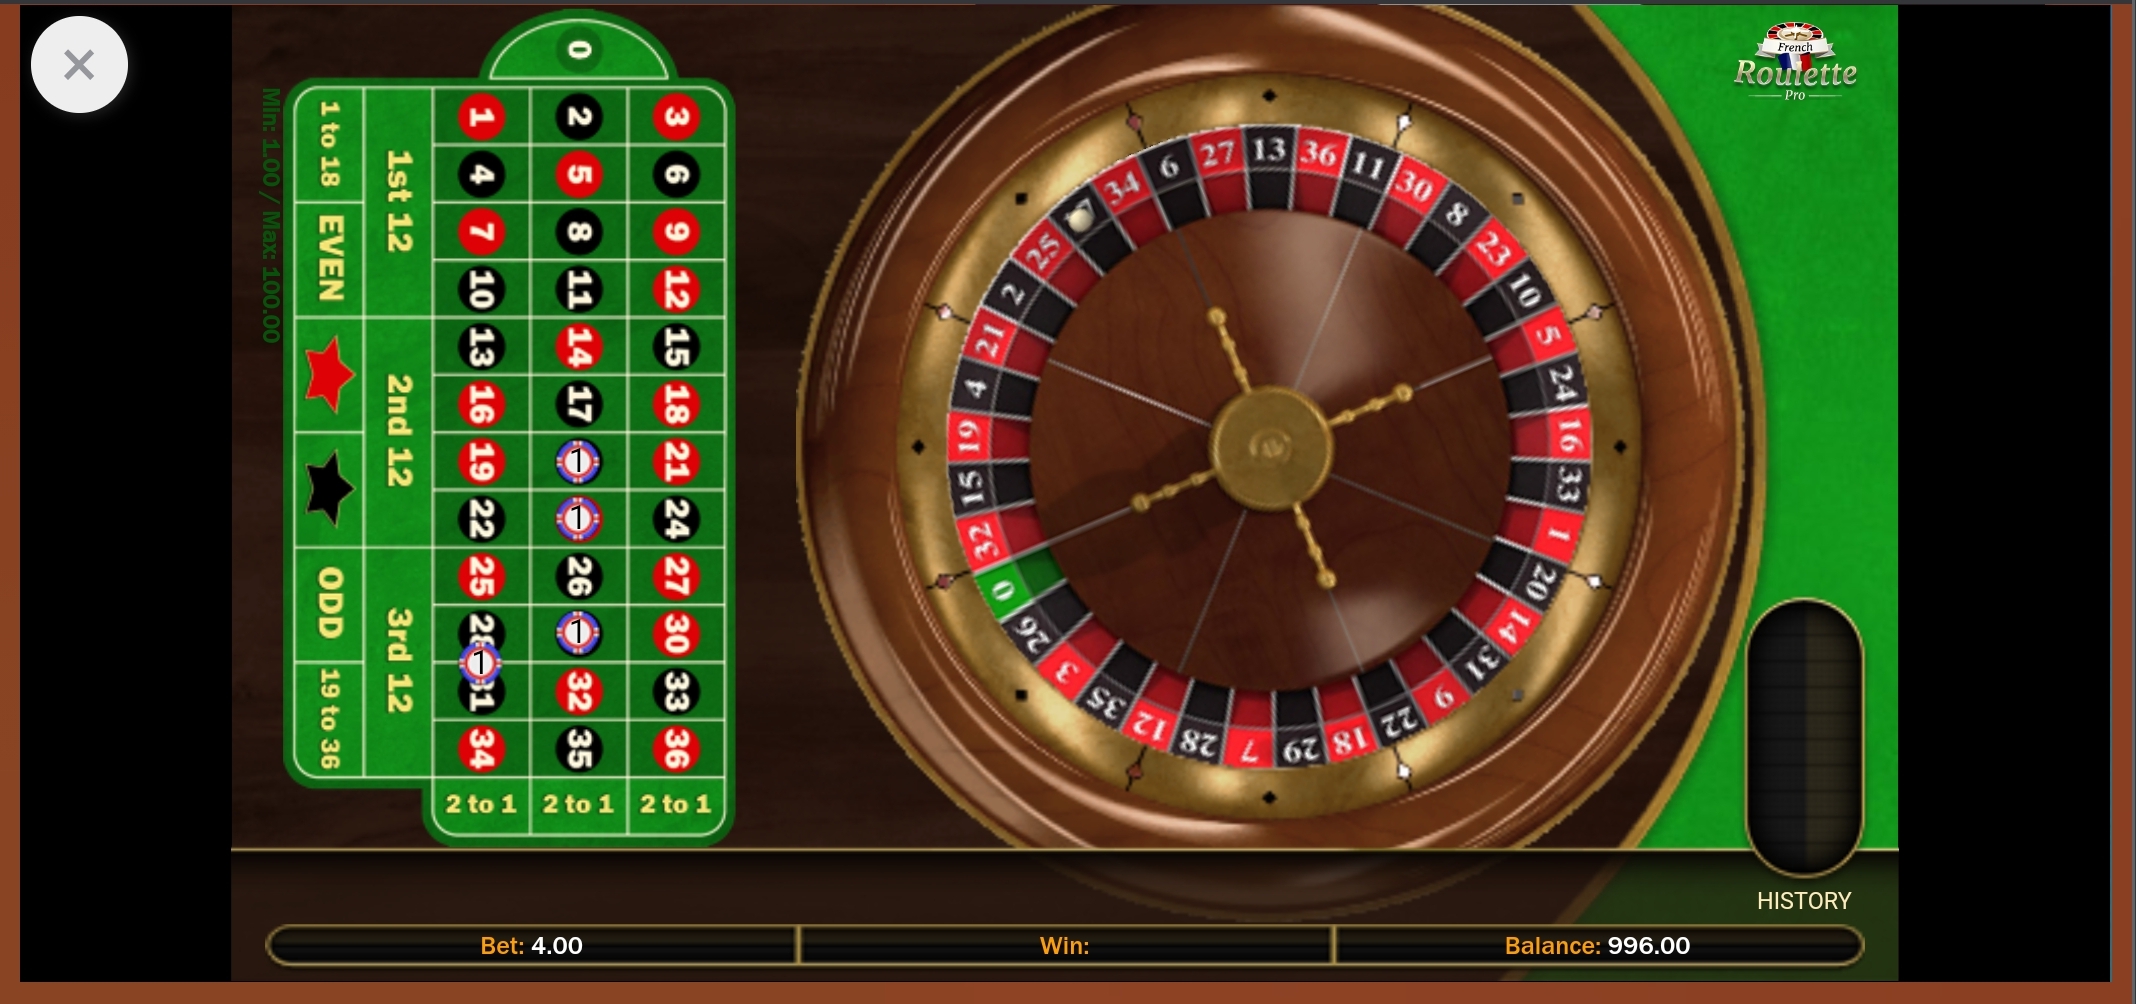 Bacanaplay Mobile Casino Games Review